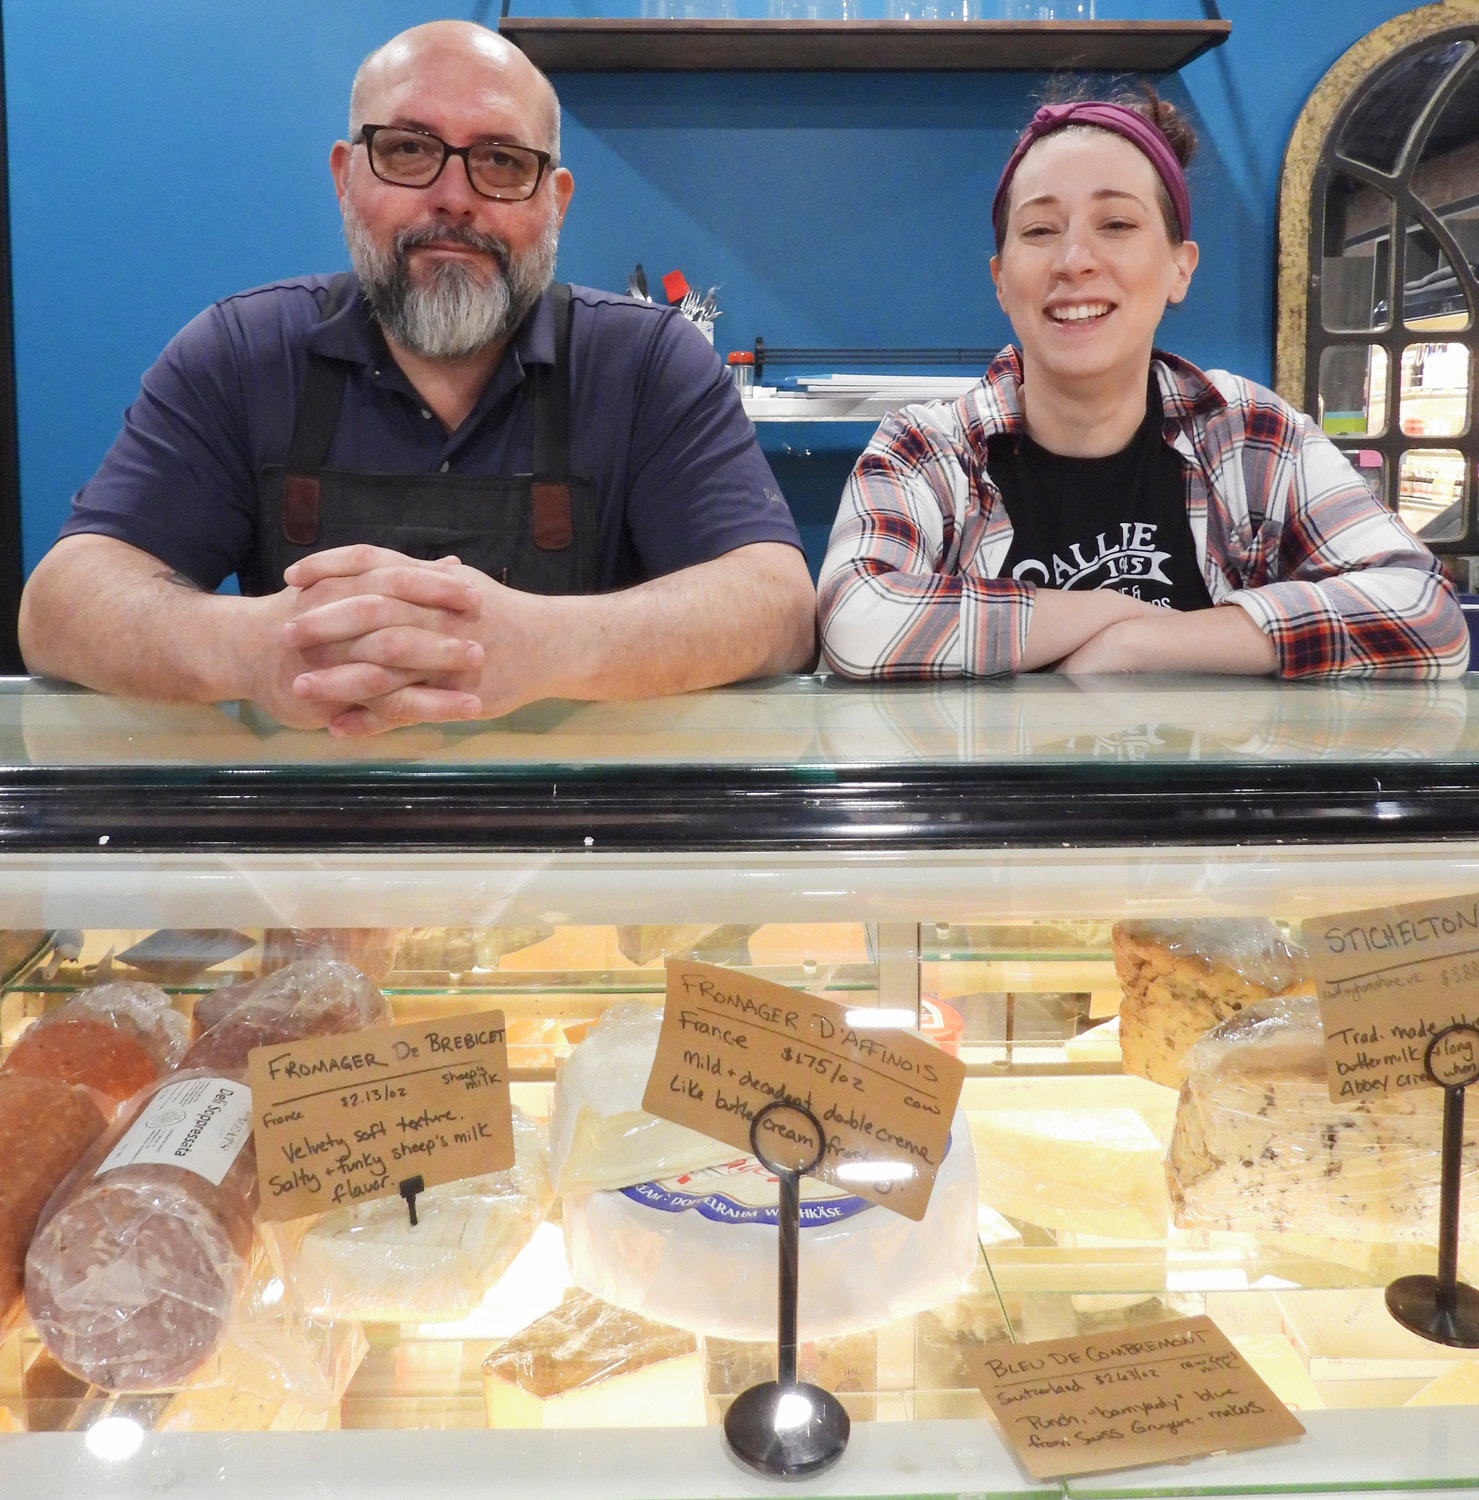 Callee 1945 offers all manner of specialty foods, drinks, and cheeses. Pictured are business and life partners Casey Baney, left, and Abbey Woodcock